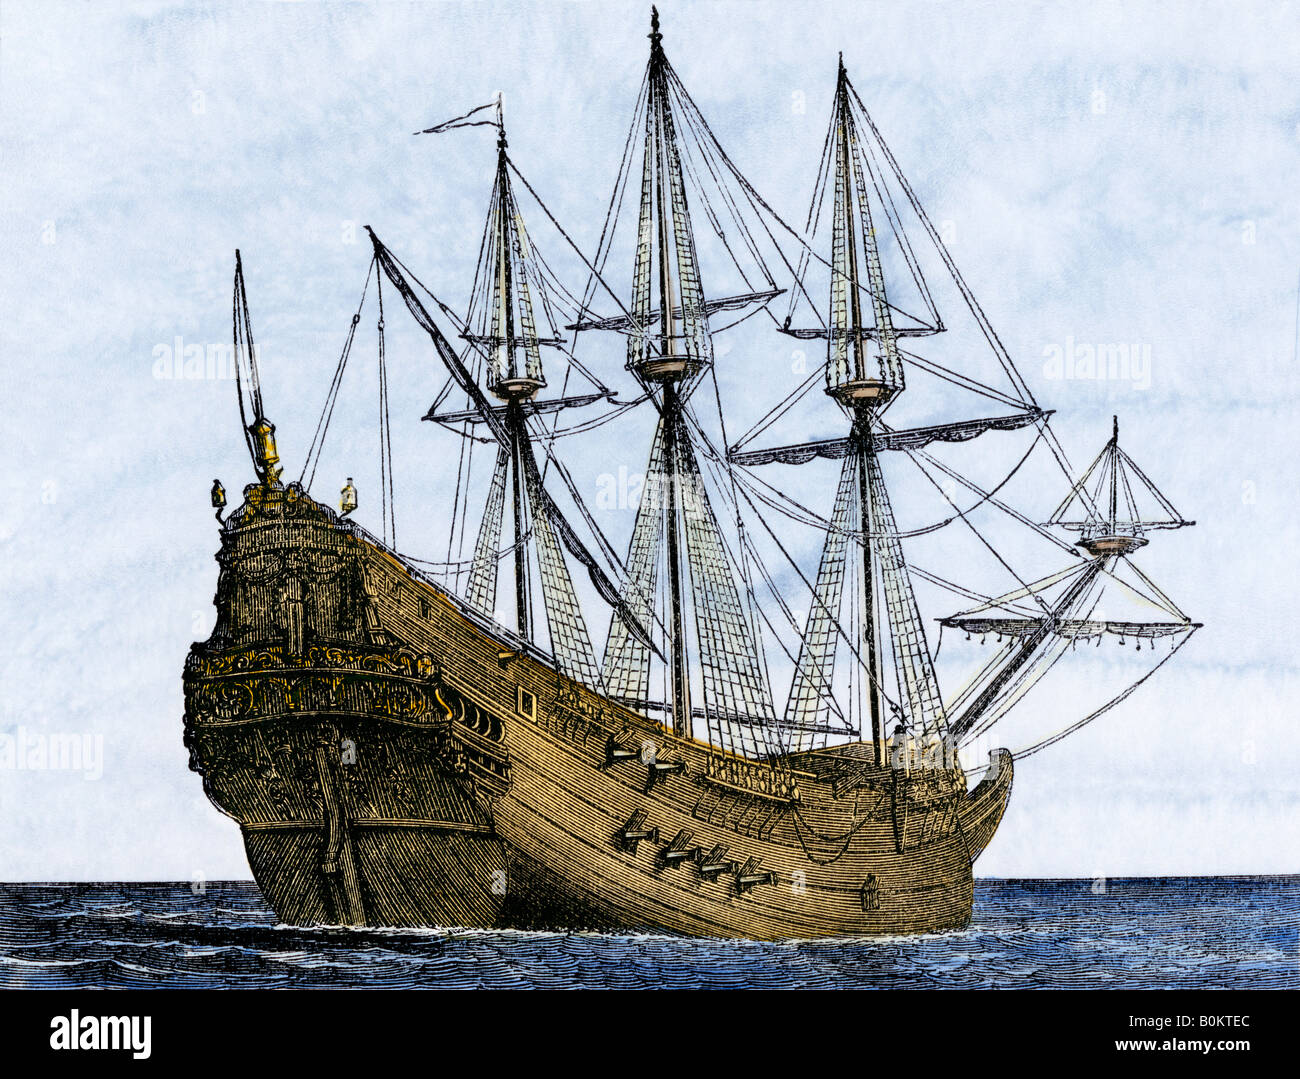 armed-genoese-carrack-a-merchant-ship-of-the-1400s-and-1500s-B0KTEC.jpg